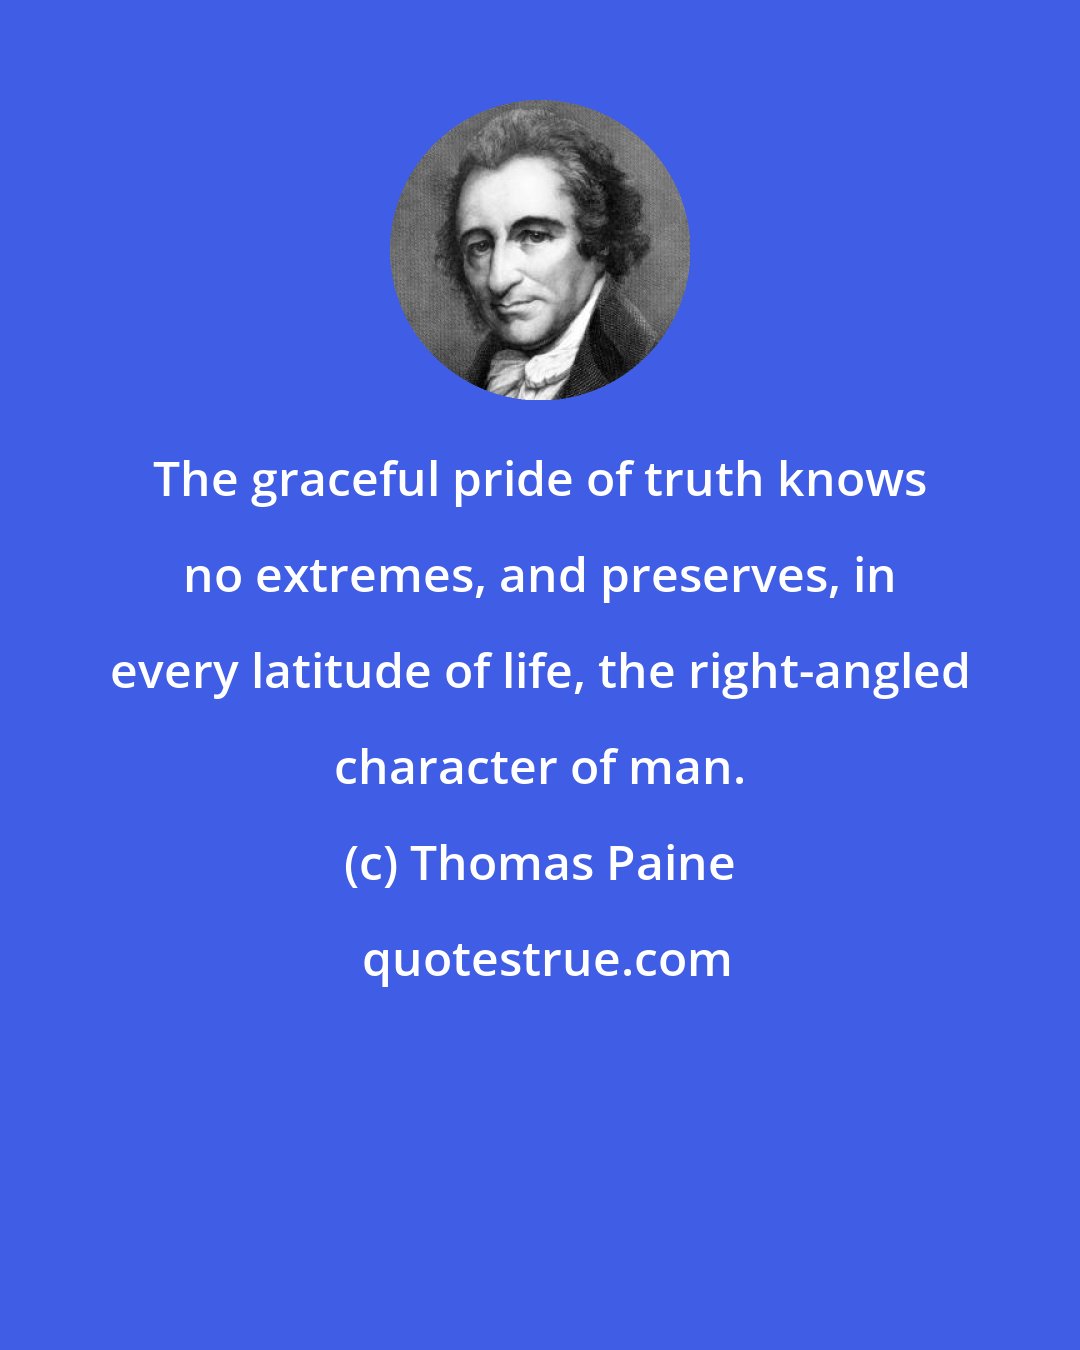 Thomas Paine: The graceful pride of truth knows no extremes, and preserves, in every latitude of life, the right-angled character of man.